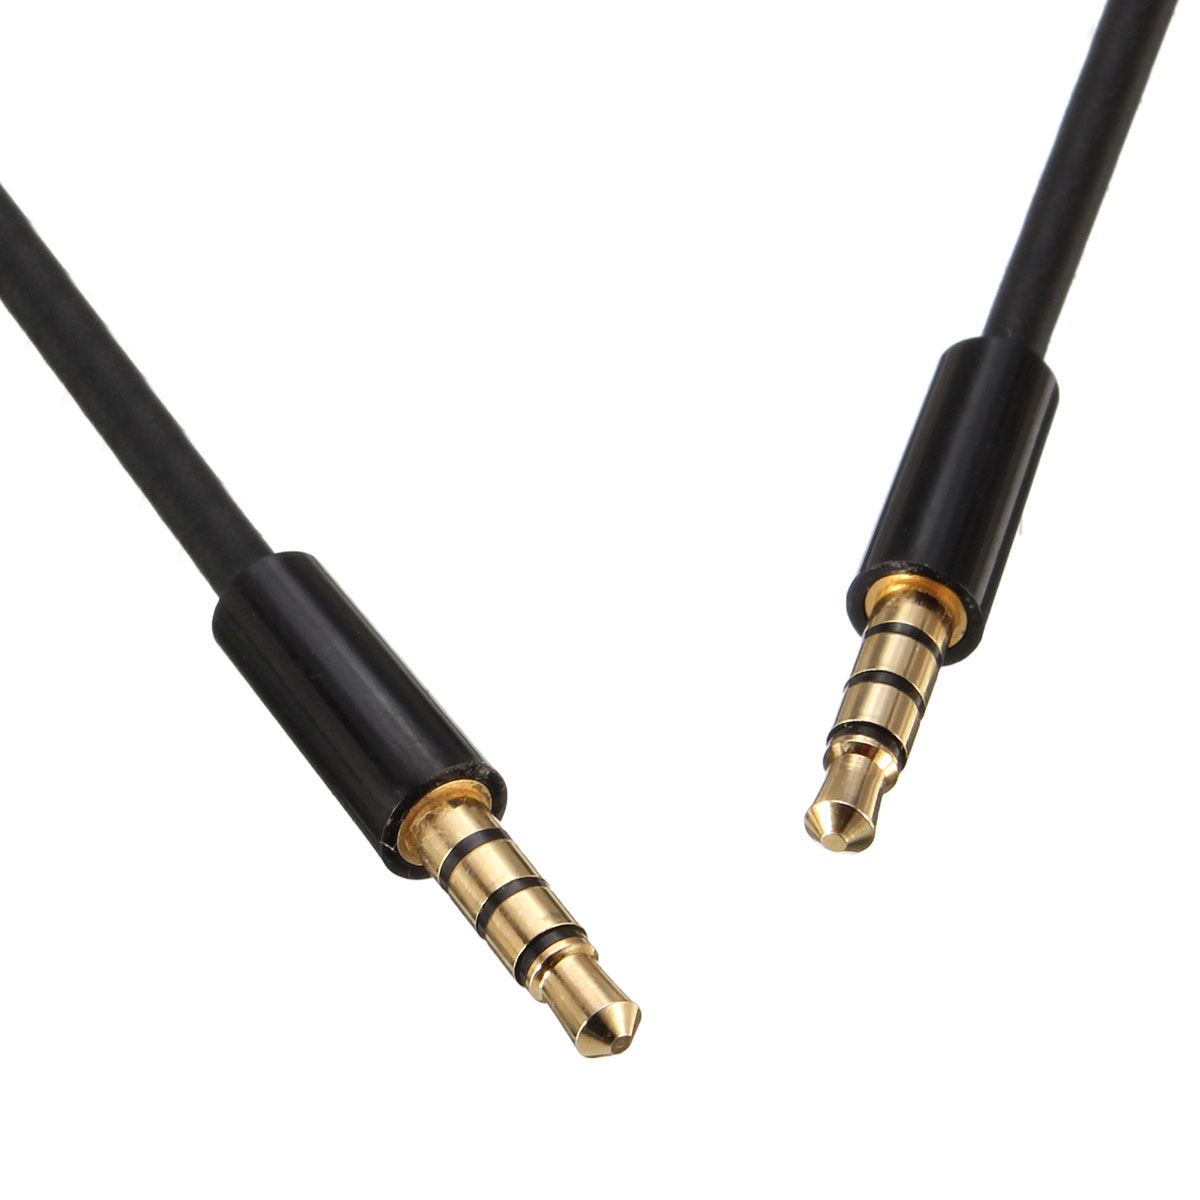 35mm-Head-Phone-Male-to-Male-Aux-Cord-Stereo-Audio-Cable-1164540-3